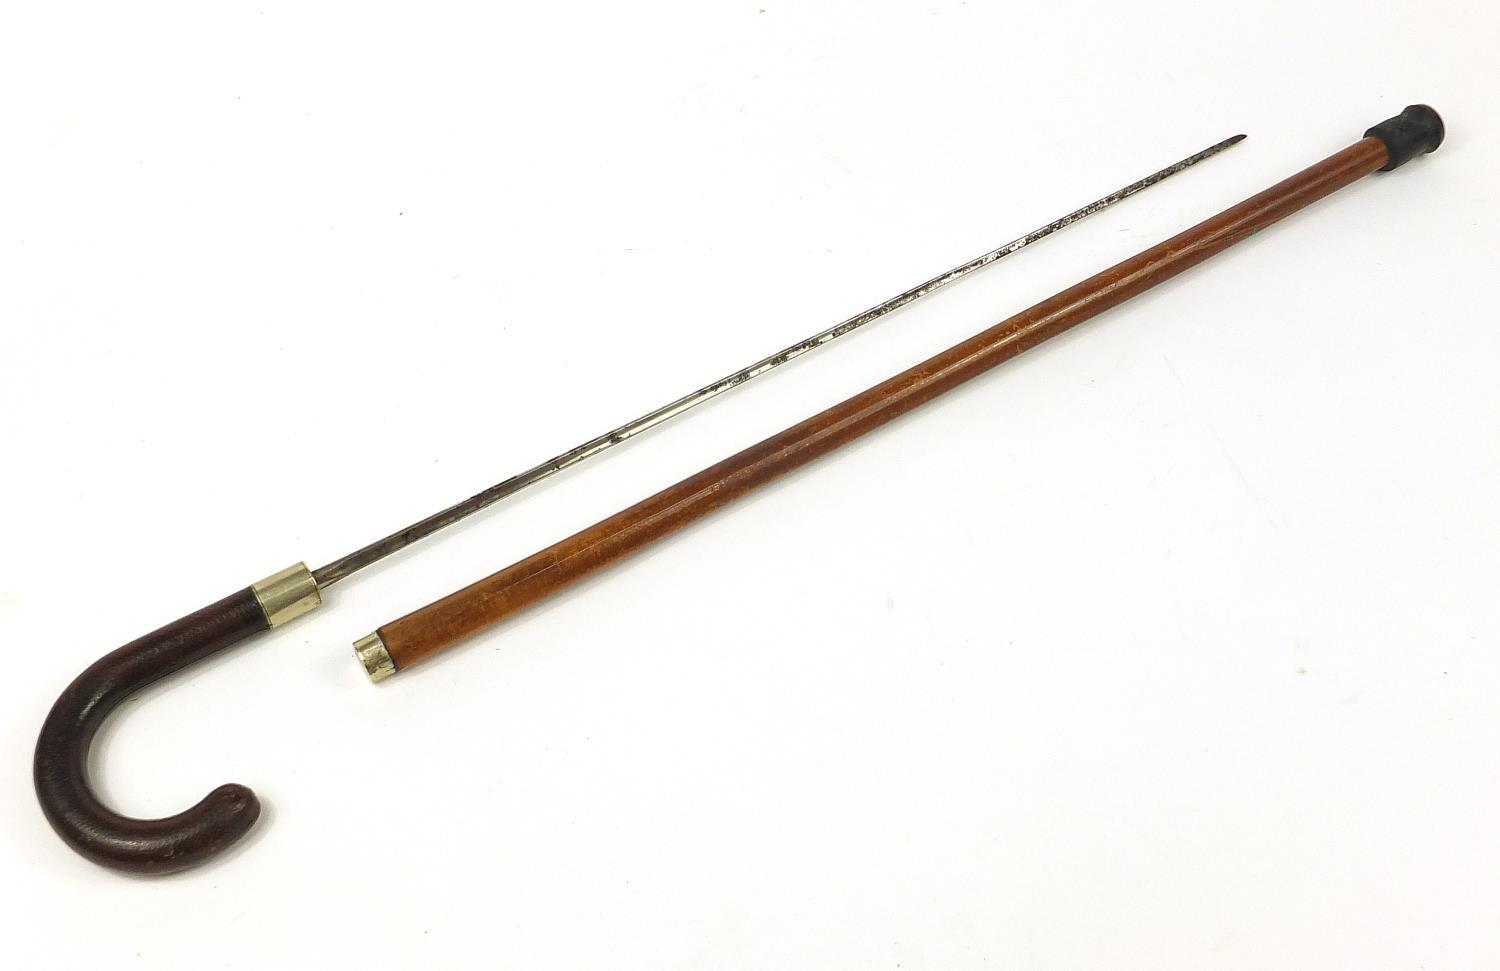 Malacca swordstick with leather handle and steel blade, 93cm in length - Image 3 of 5